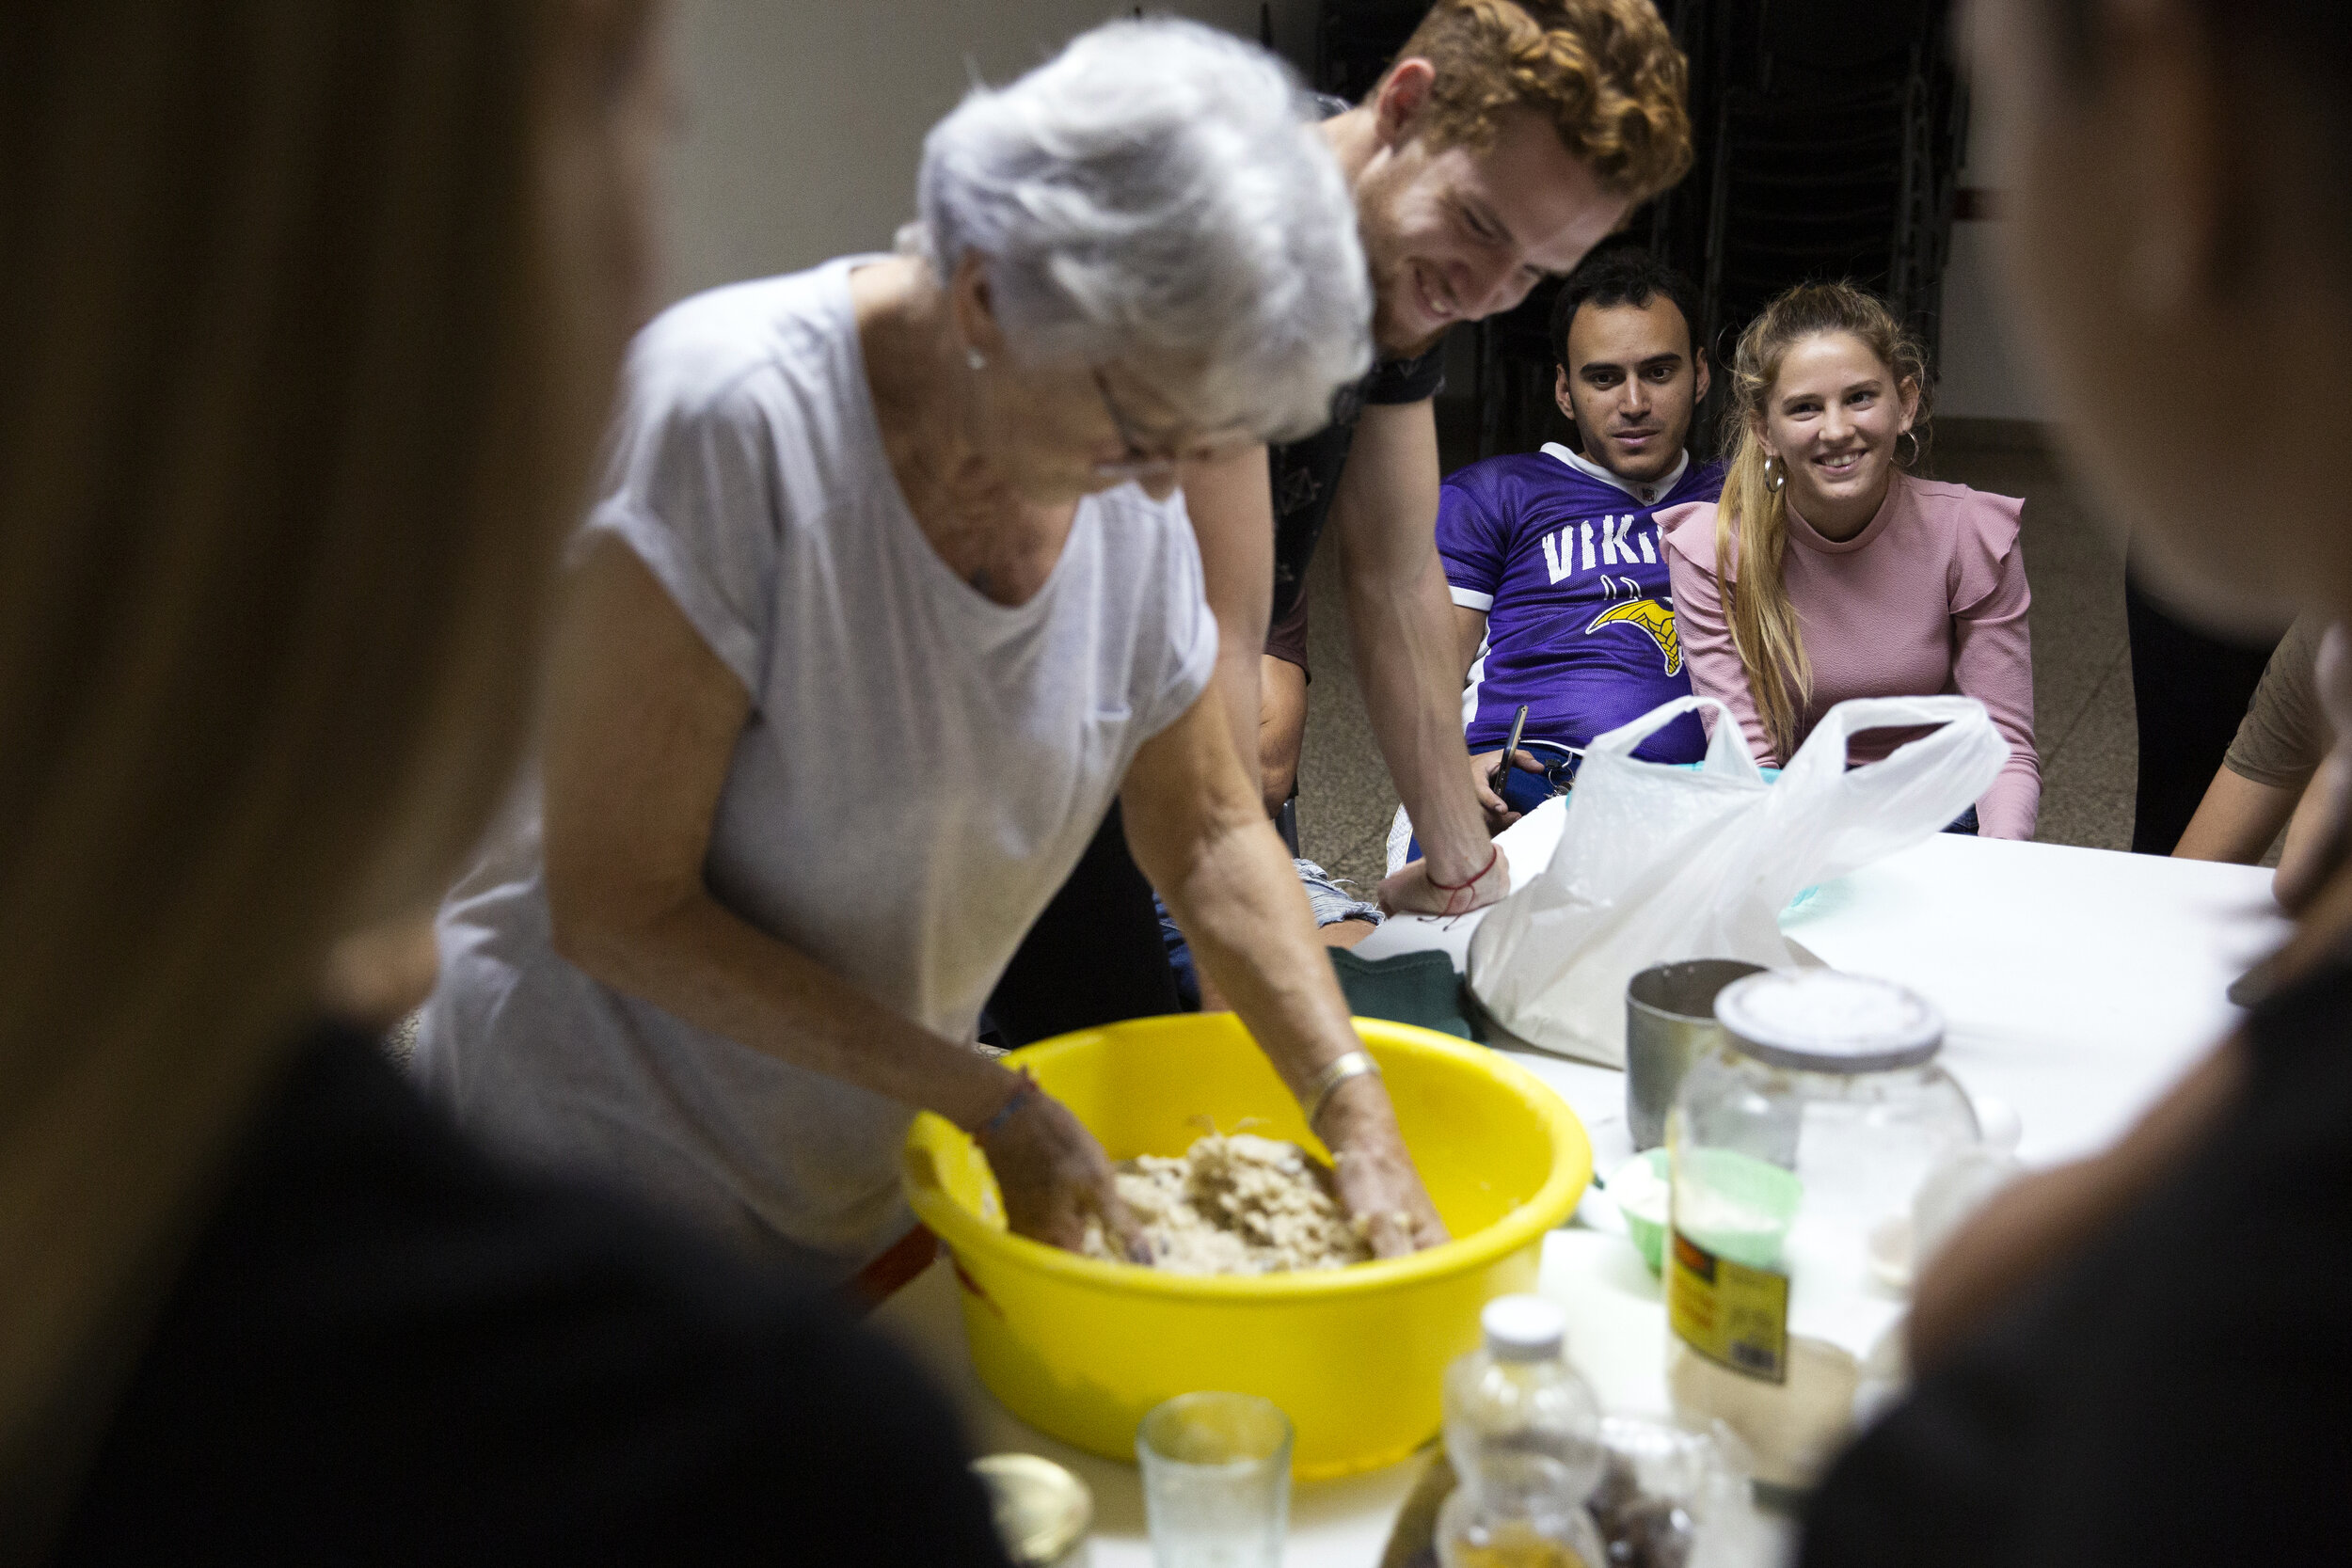  Ida (right), a synagogue elder, teachers the synagogue’s youth group how to make challah on January 18, 2020. 